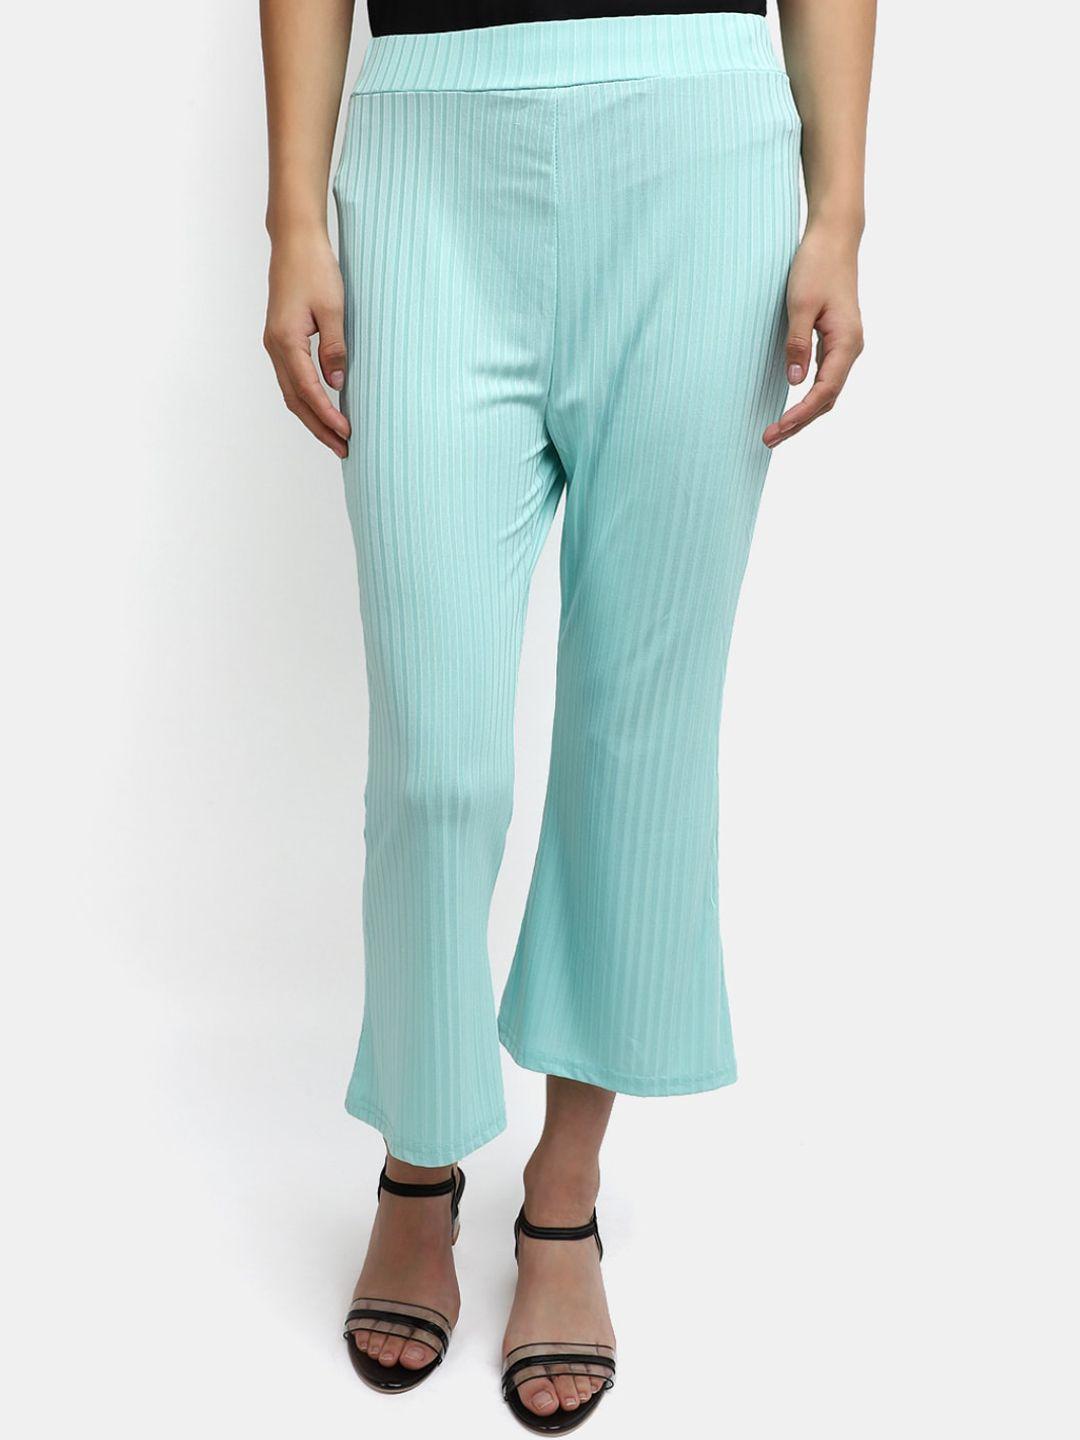 v-mart women slim fit striped mid-rise trousers